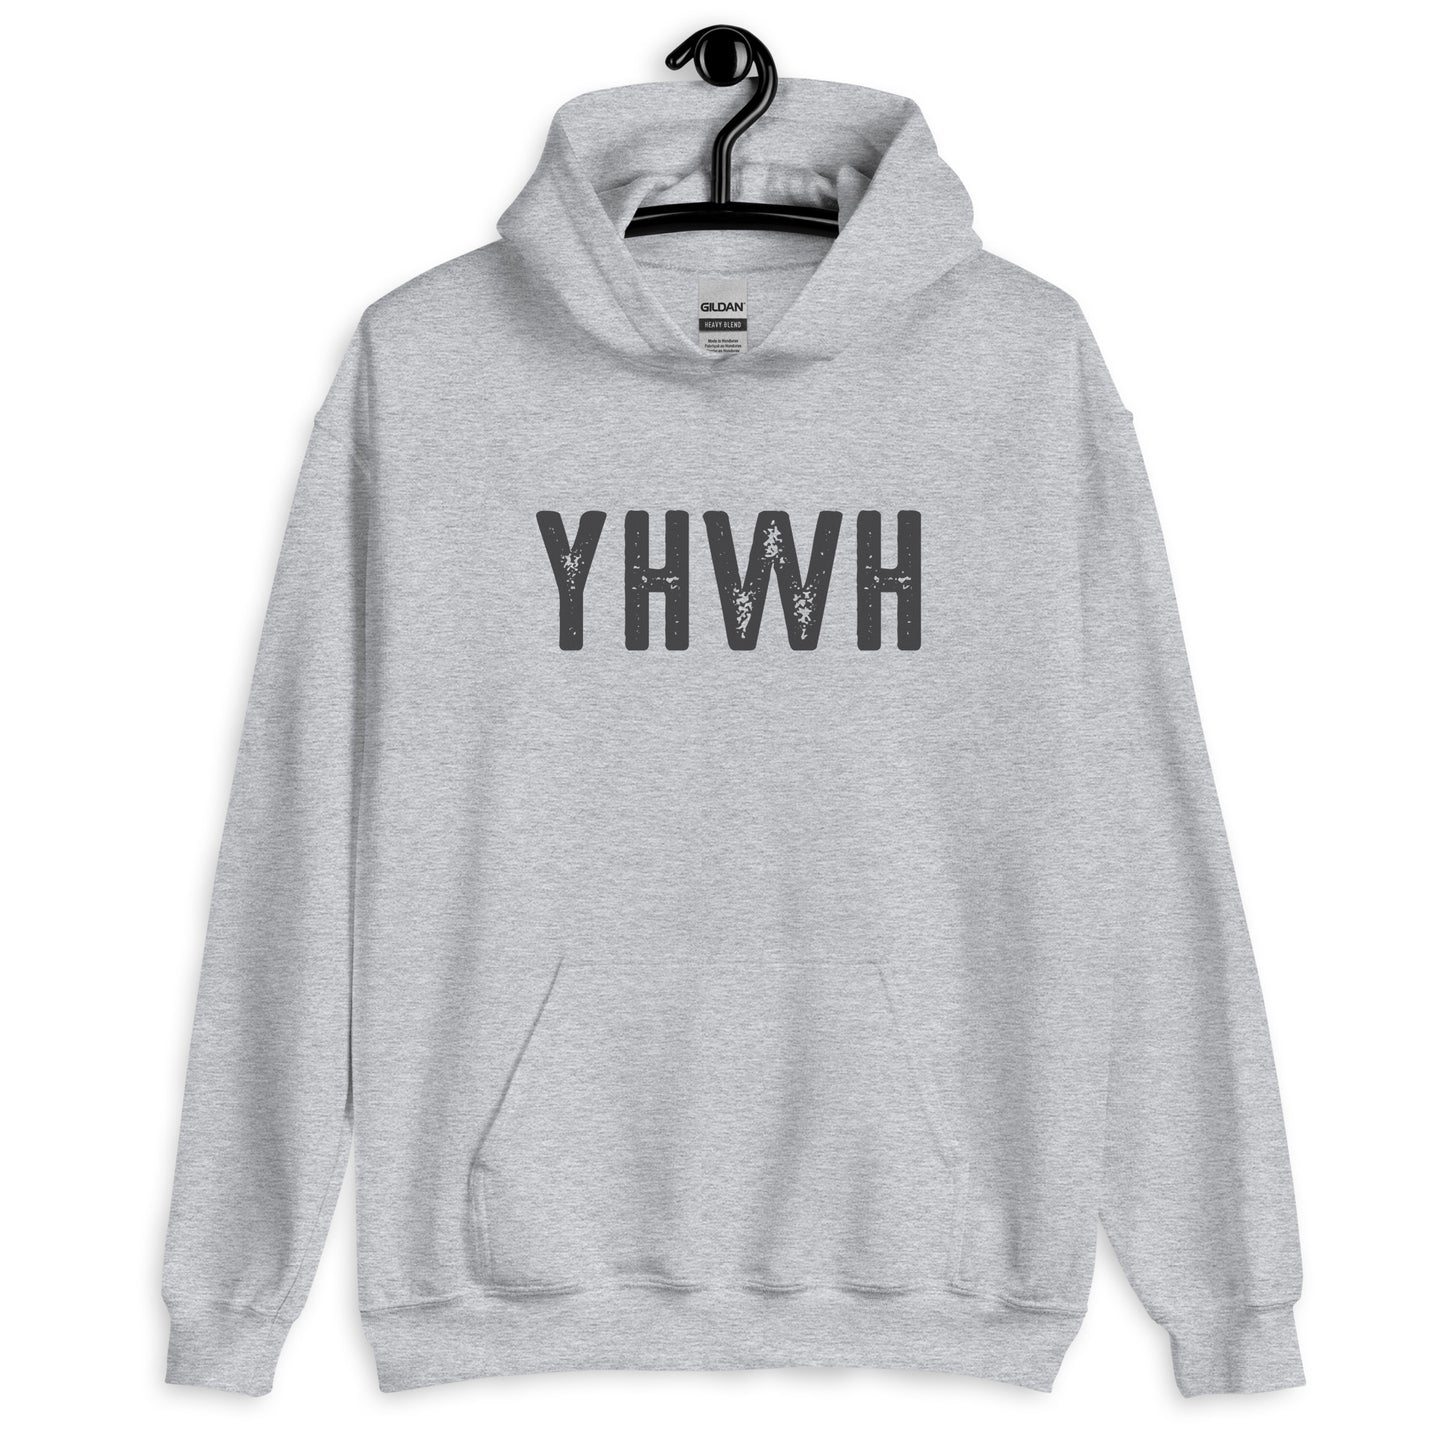 YHWH Hebrew Biblical Name of God Yahweh Christian aesthetic distressed design printed in charcoal gray on cozy heather gray unisex hoodie sweatshirt for men and women